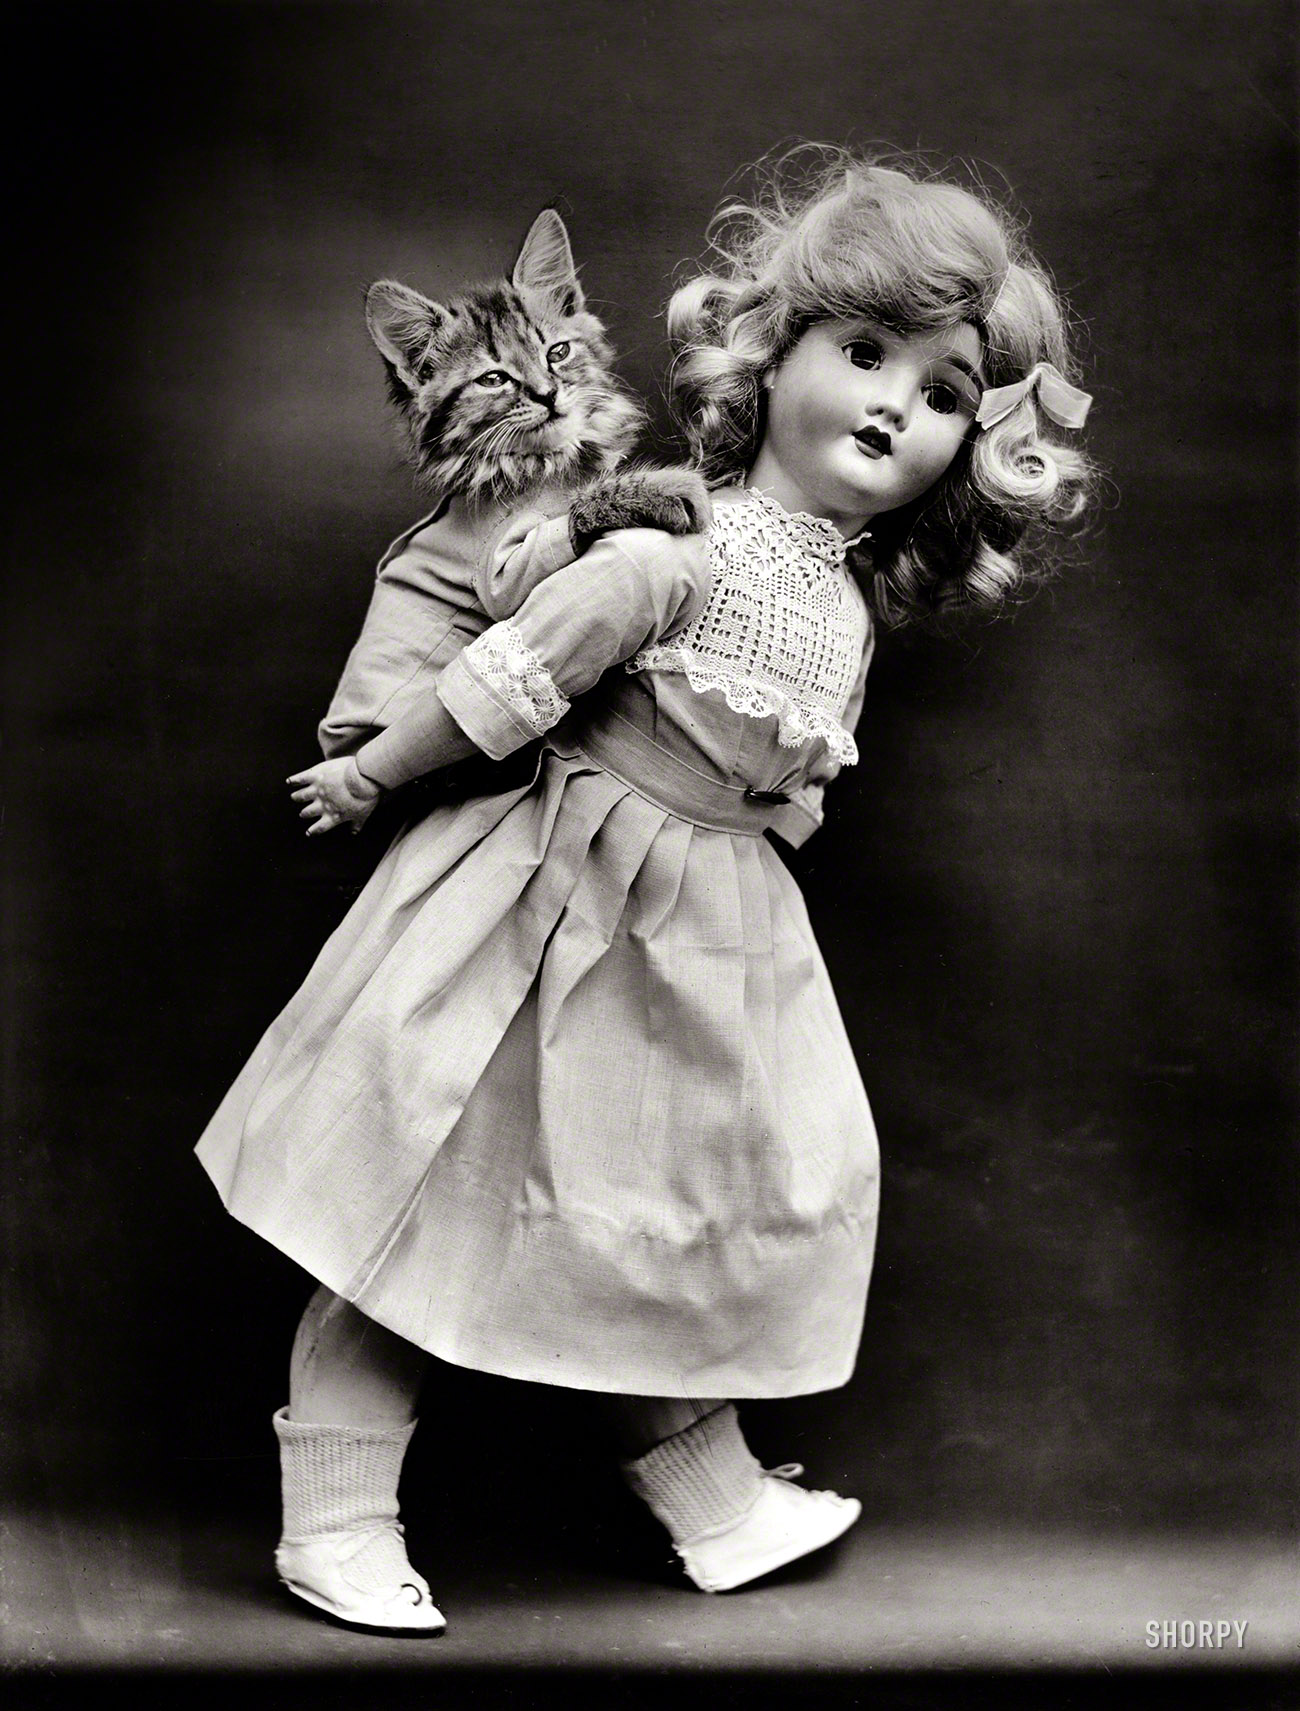 1914. "Kitten being carried on back of doll." And quite a doll, even if she is no Grace Kelly. Photo by Harry W. Frees. View full size.